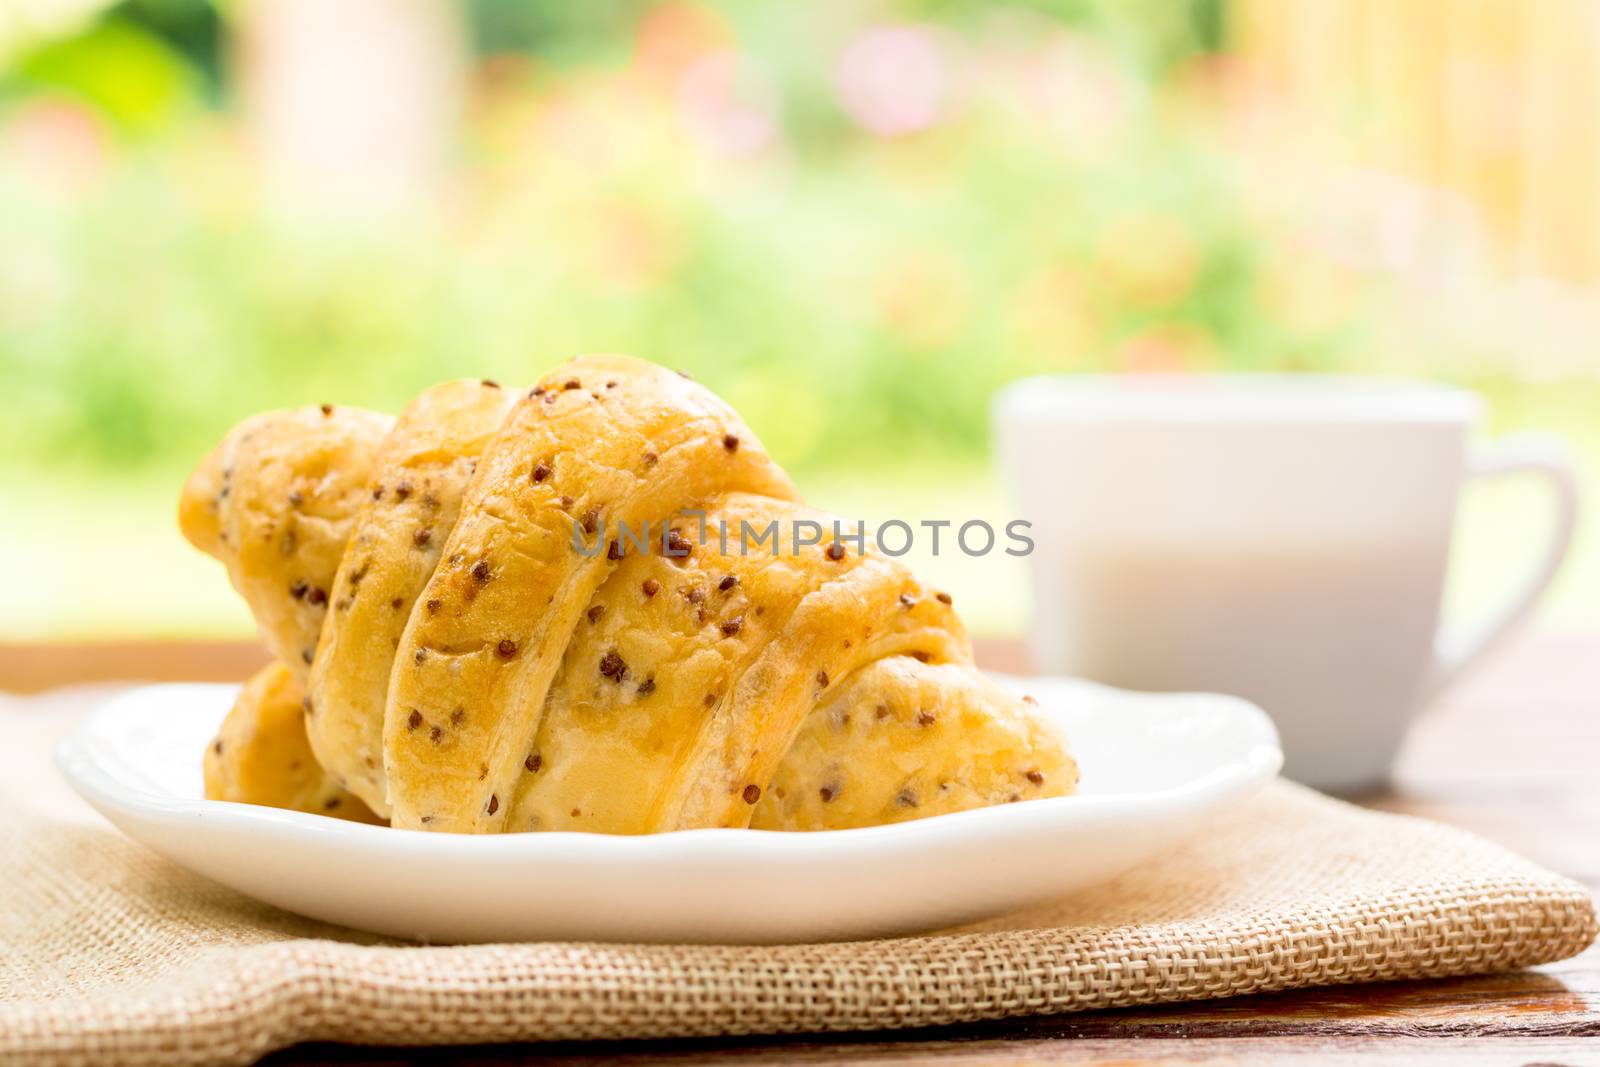 Breakfast concept. Croissants with perilla seeds on white plate and white cup of black coffee on wooden table with green bokeh background.